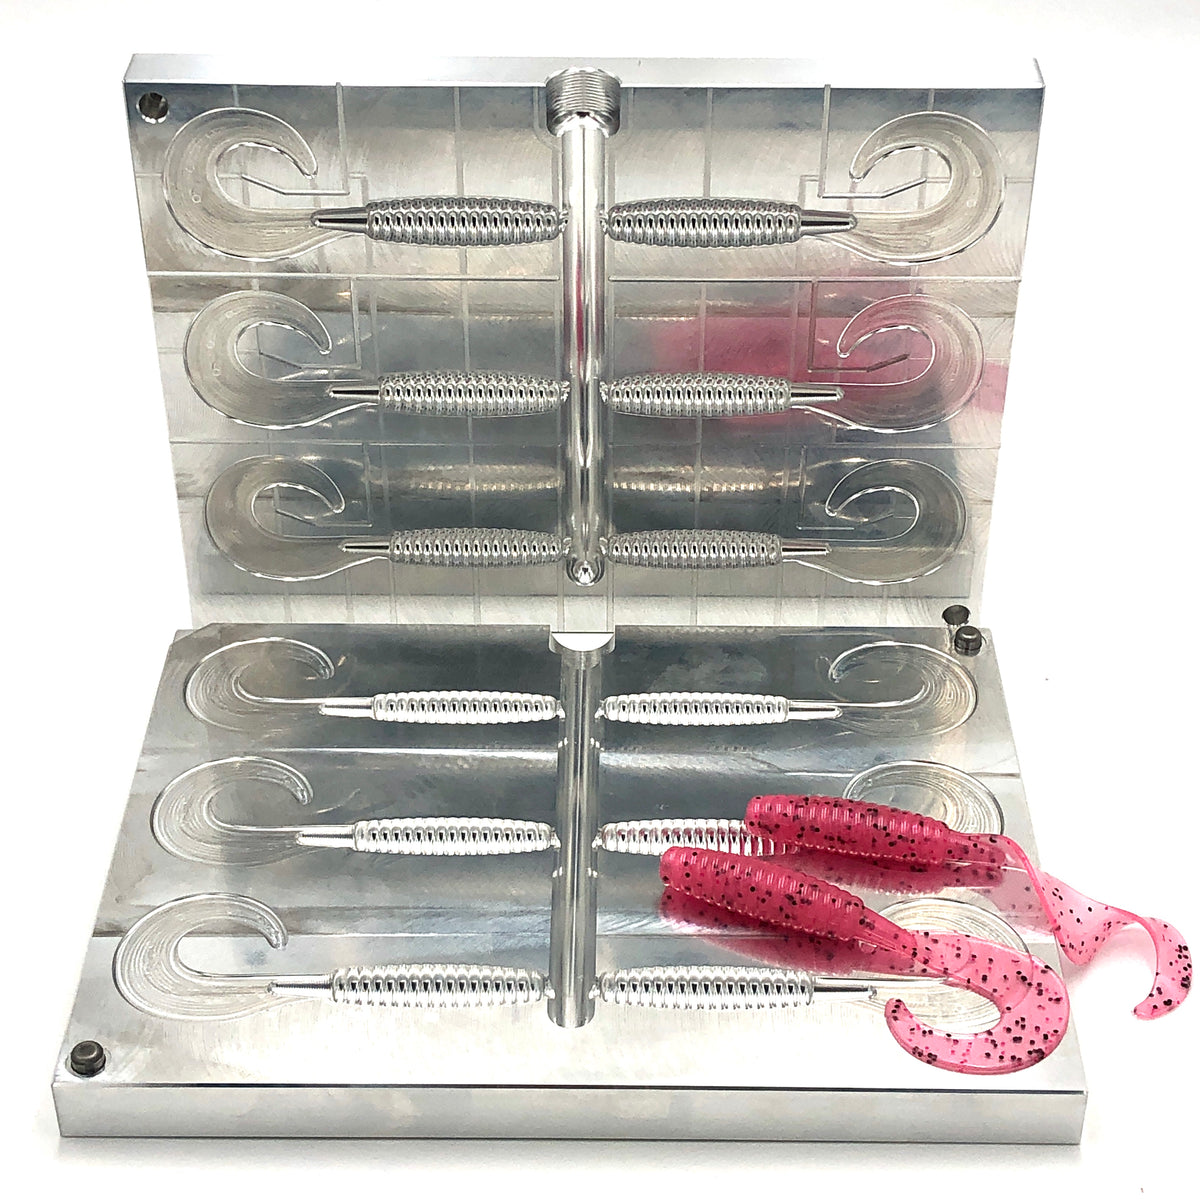 5 Inch Curly Tail Grub Hand Injection Mold – Epic Bait Molds